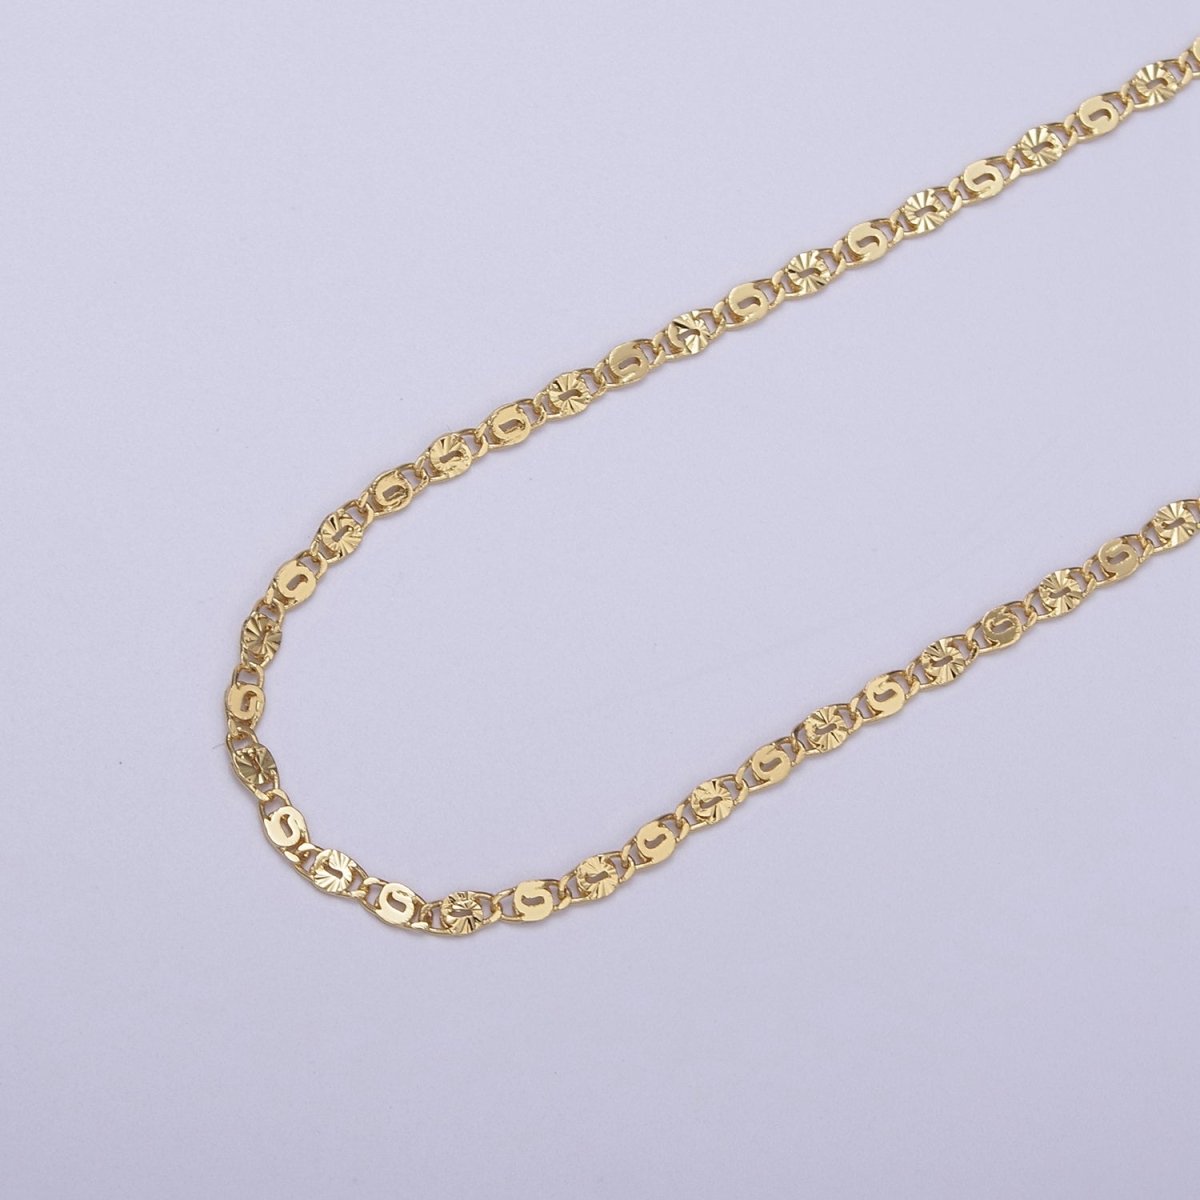 24K Gold Filled Unique Scroll Chain, Sunburst Textured Unfinished Chain in Gold & Silver For Jewelry Making | ROLL-680, ROLL-681 Clearance Pricing - DLUXCA